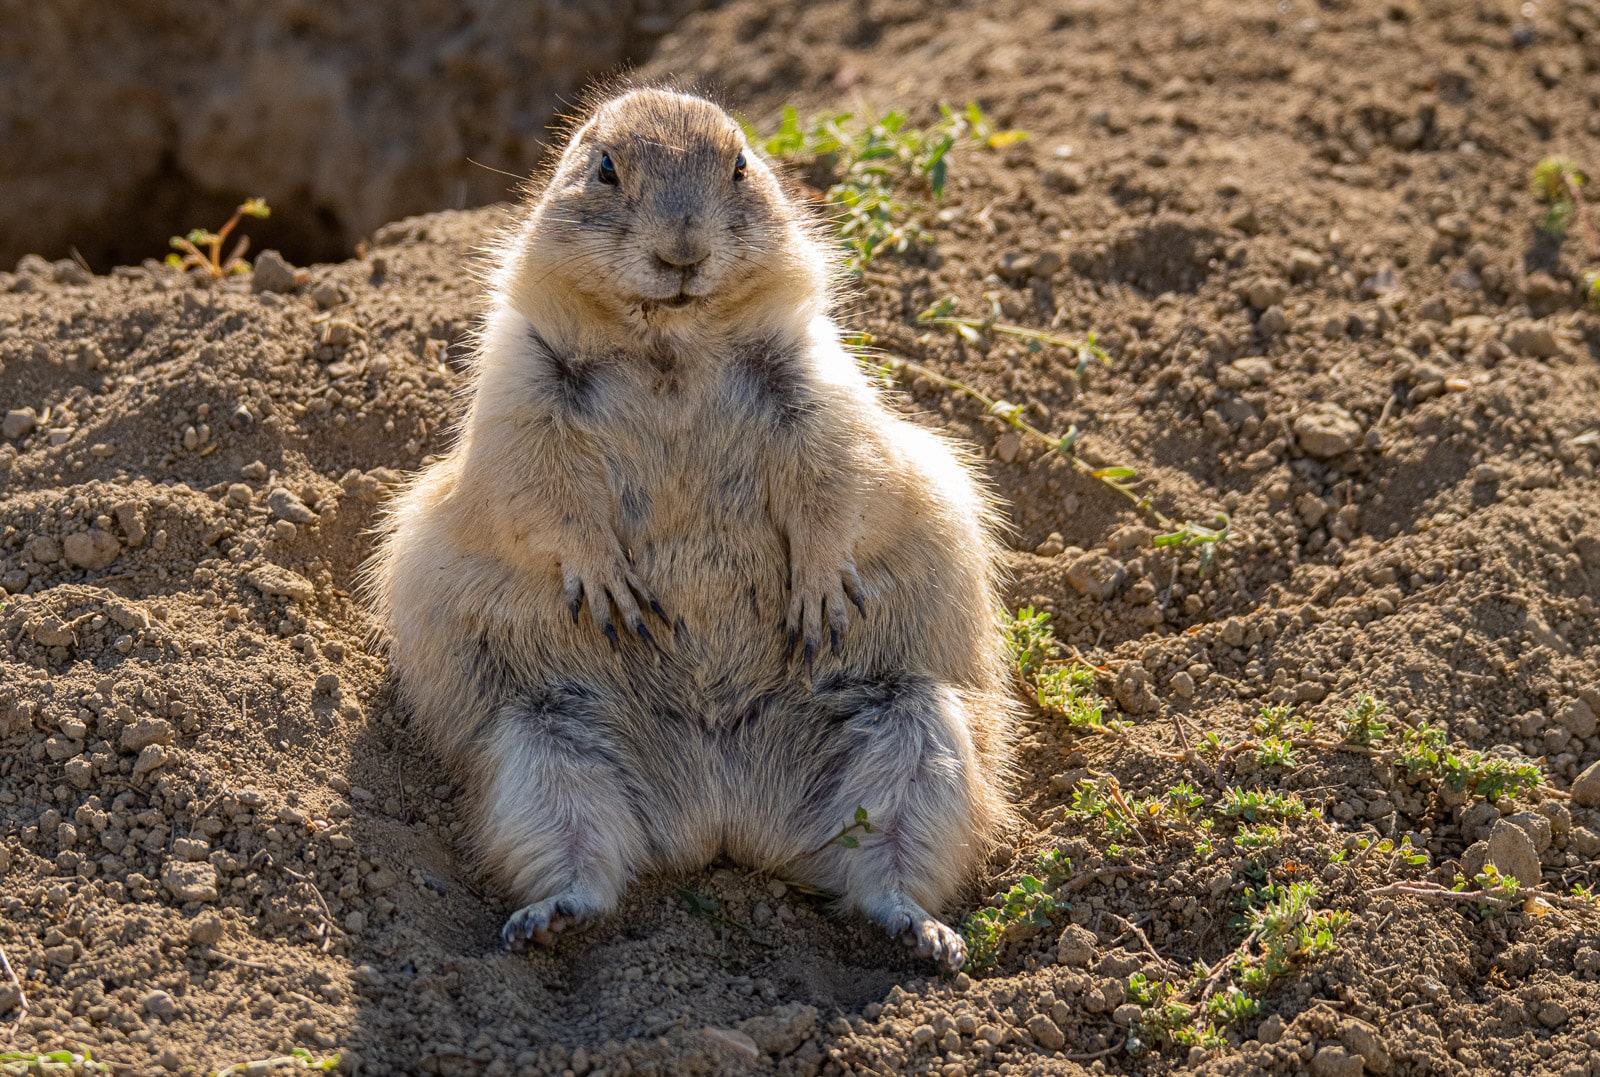 Prairie dogs along the scenic drive in the South Unit of Theodore Roosevelt National Park near Medora, North Dakota.